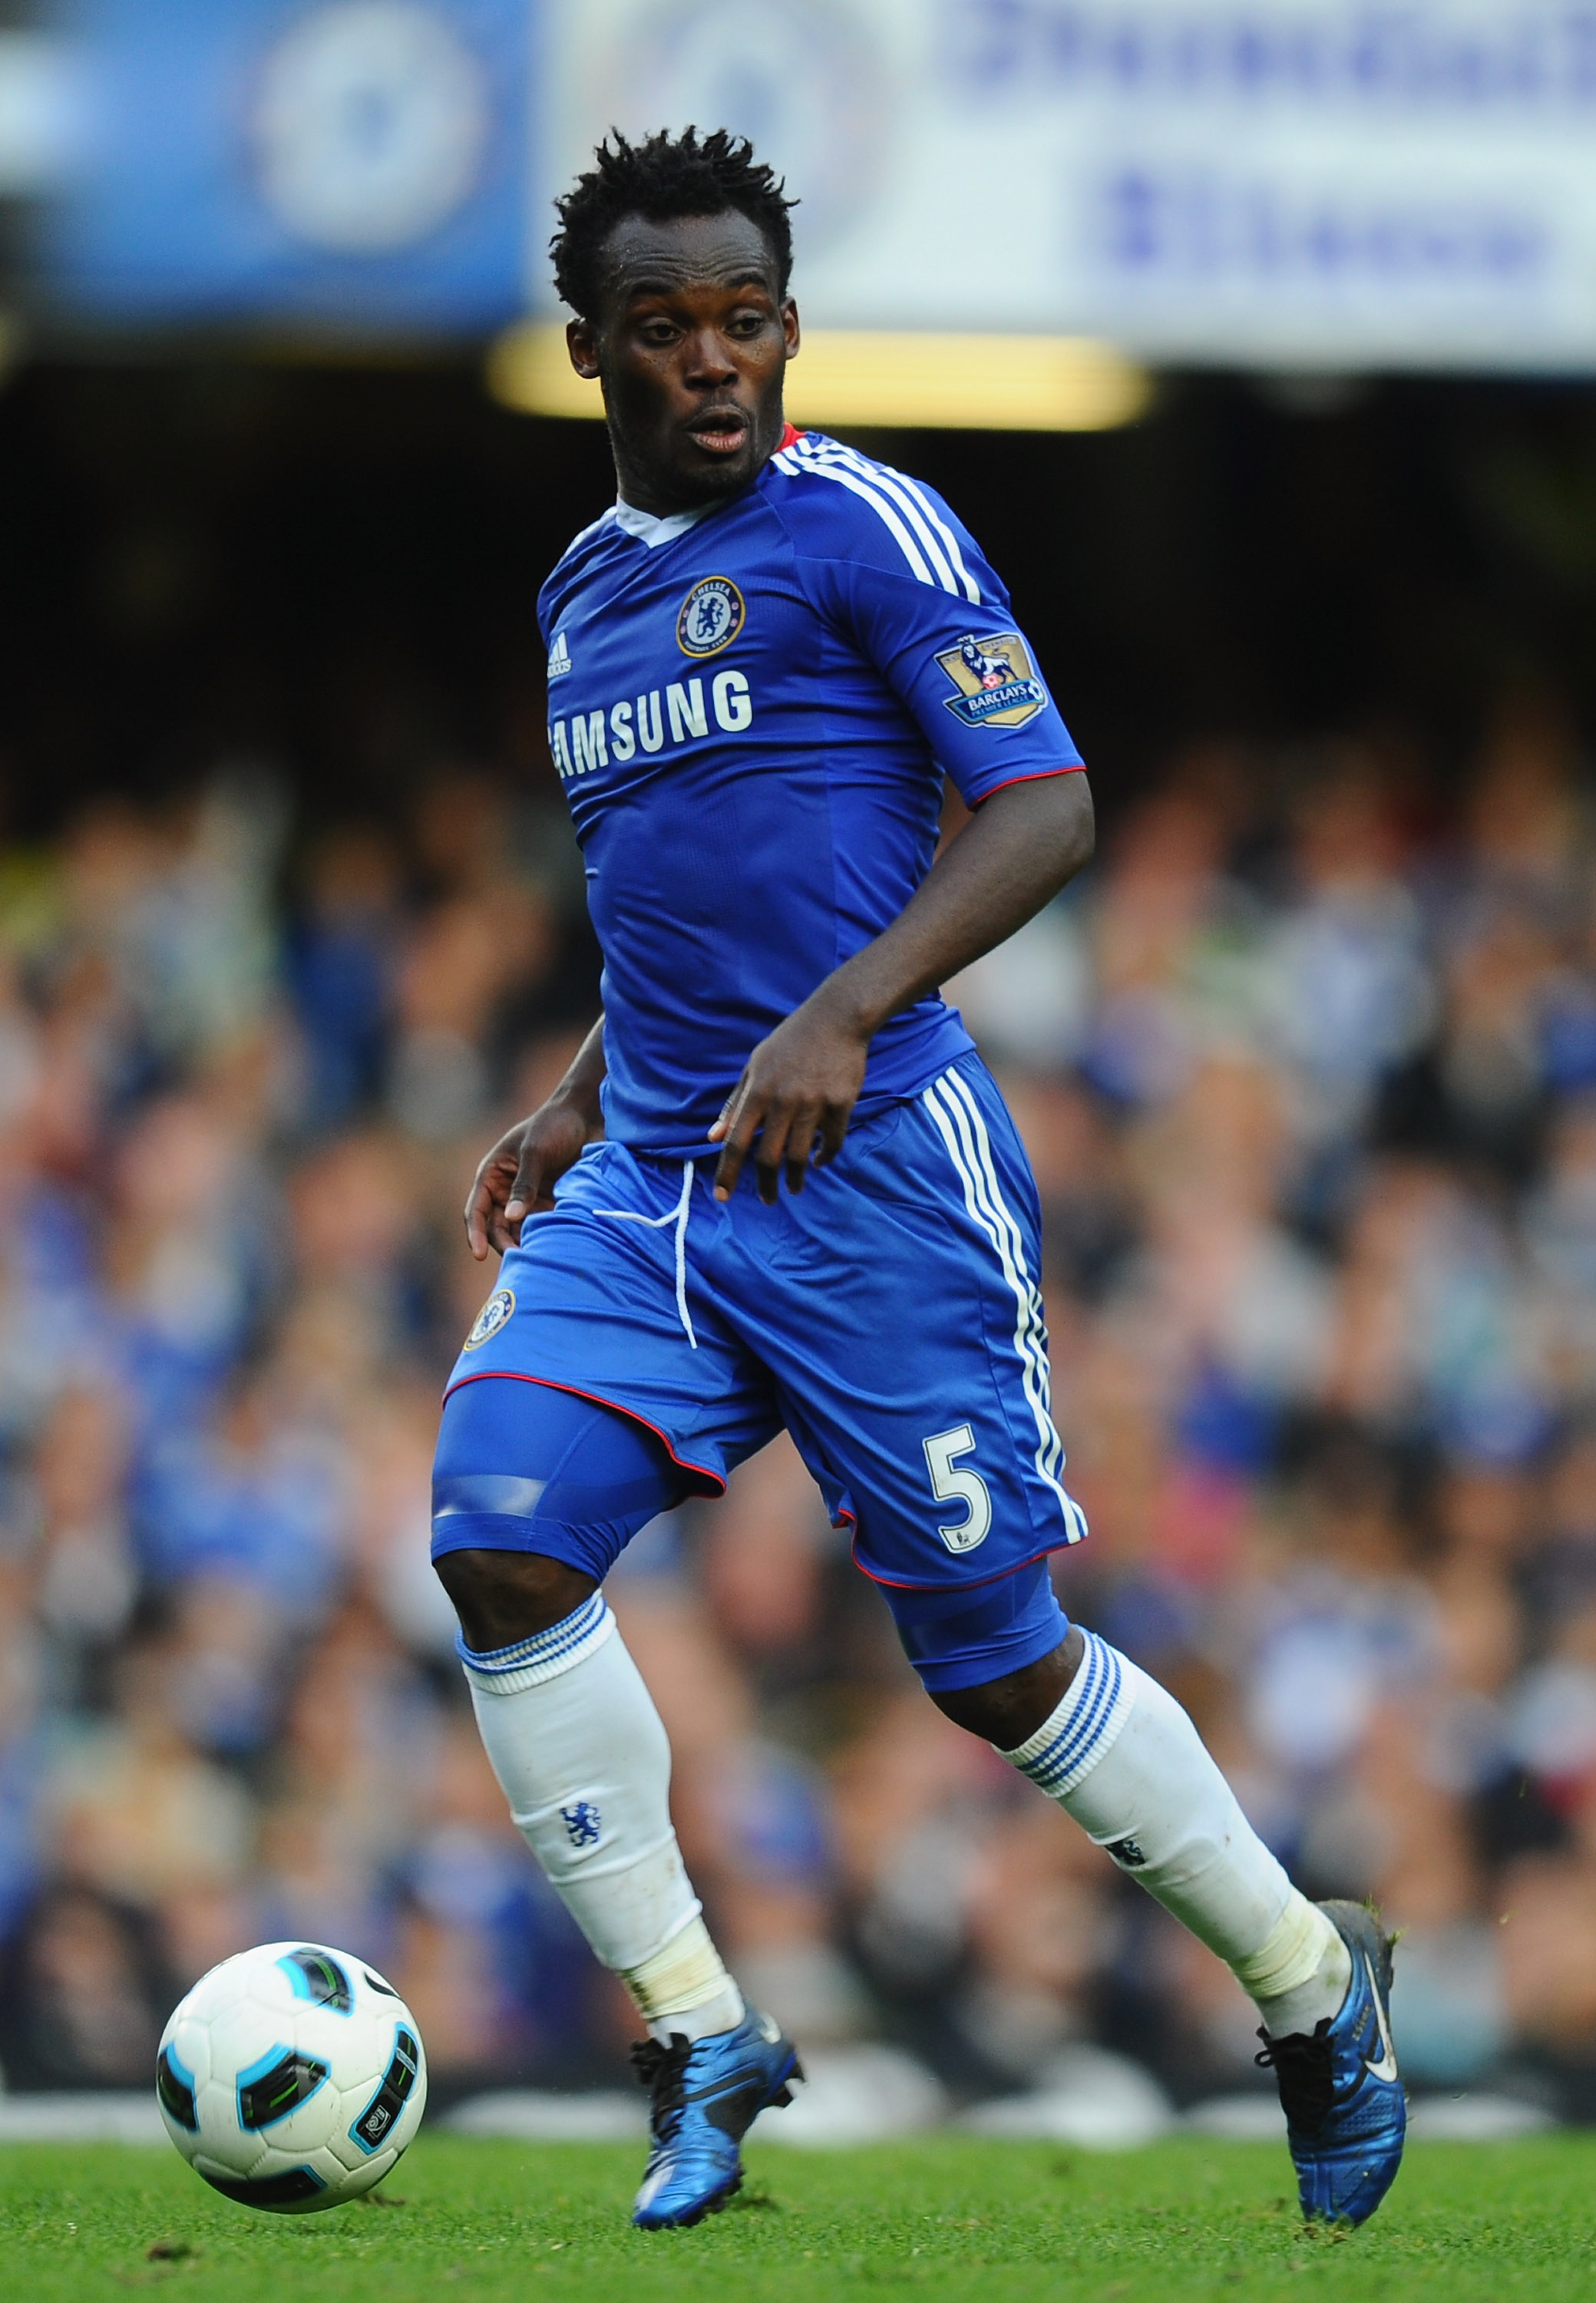 LONDON, ENGLAND - OCTOBER 03:  Michael Essien of Chelsea in action during the Barclays Premier League match between Chelsea and Arsenal at Stamford Bridge on October 3, 2010 in London, England.  (Photo by Mike Hewitt/Getty Images)